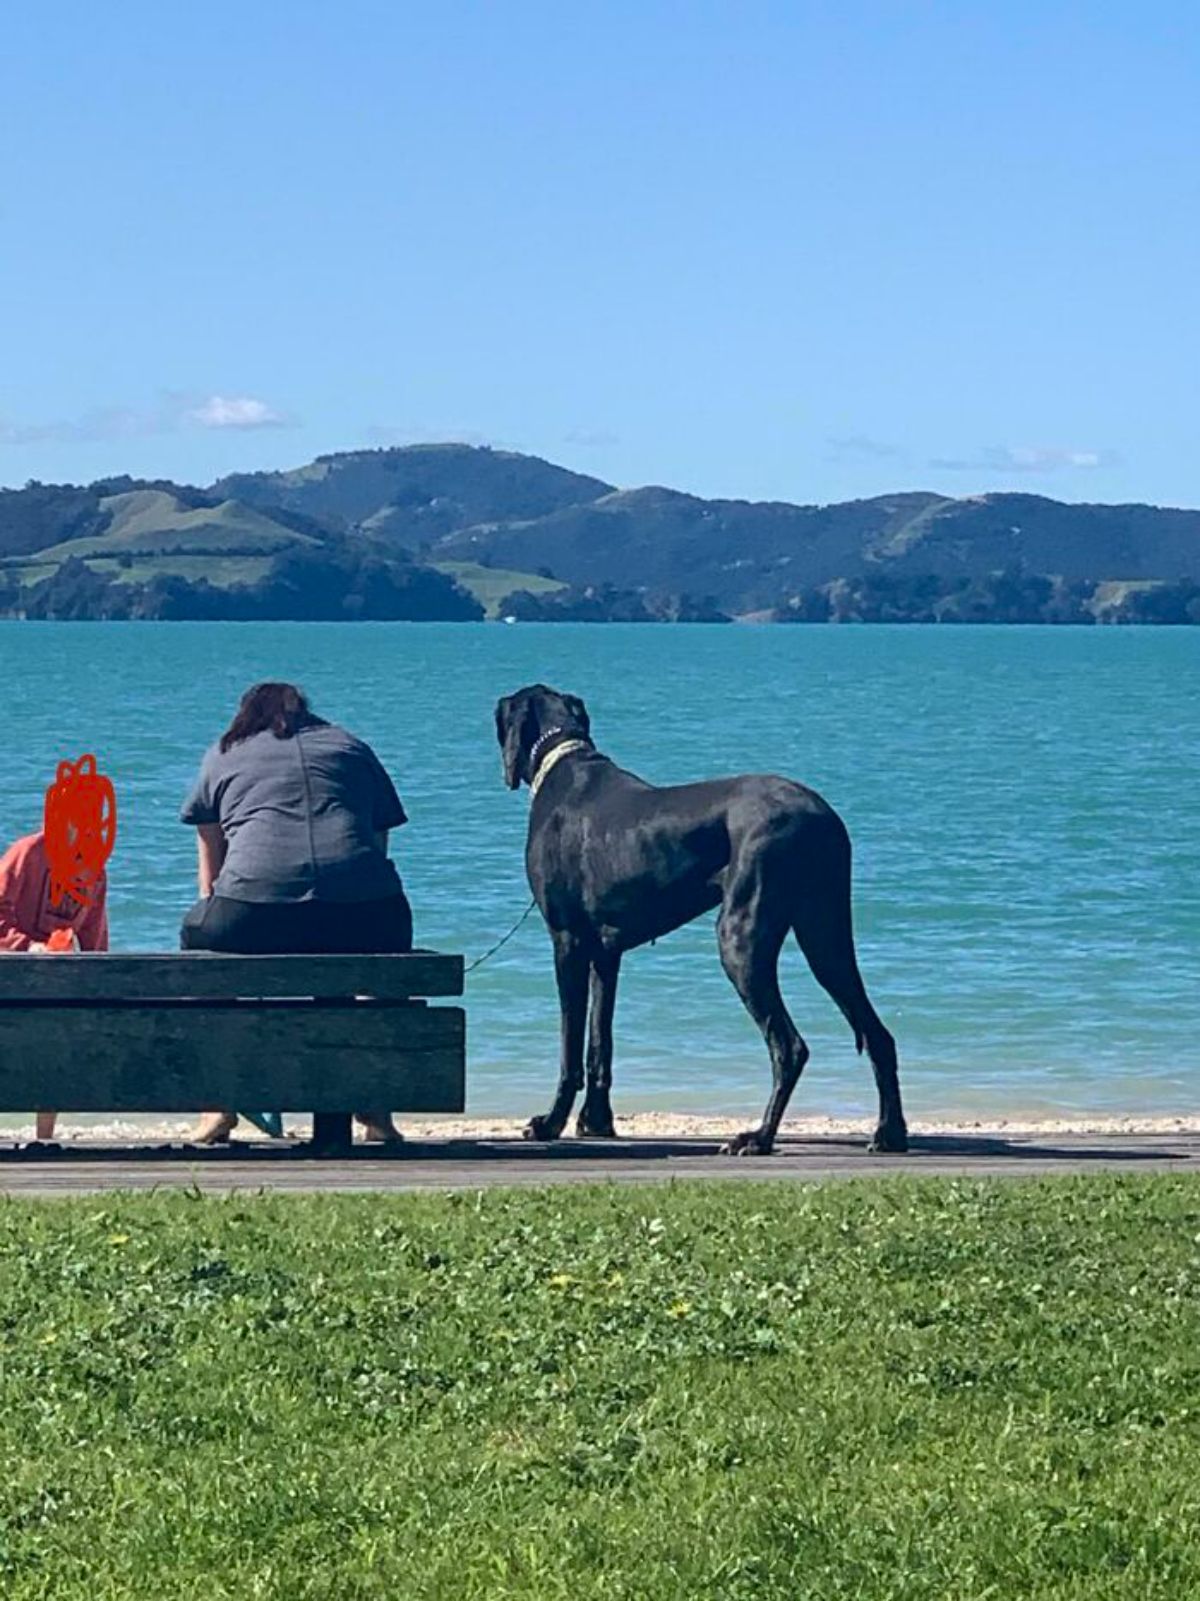 black great dane on a leash next to a woman sitting on a bench by a lake